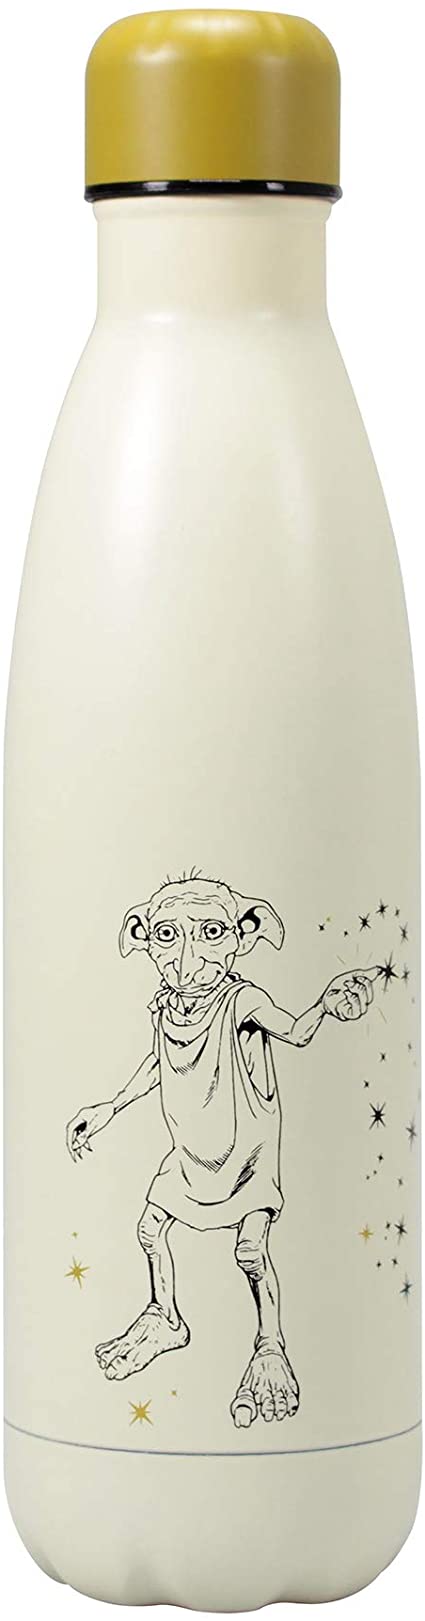 Waterbottle Metal Harry Potter Dobby - Heritage Of Scotland - N/A